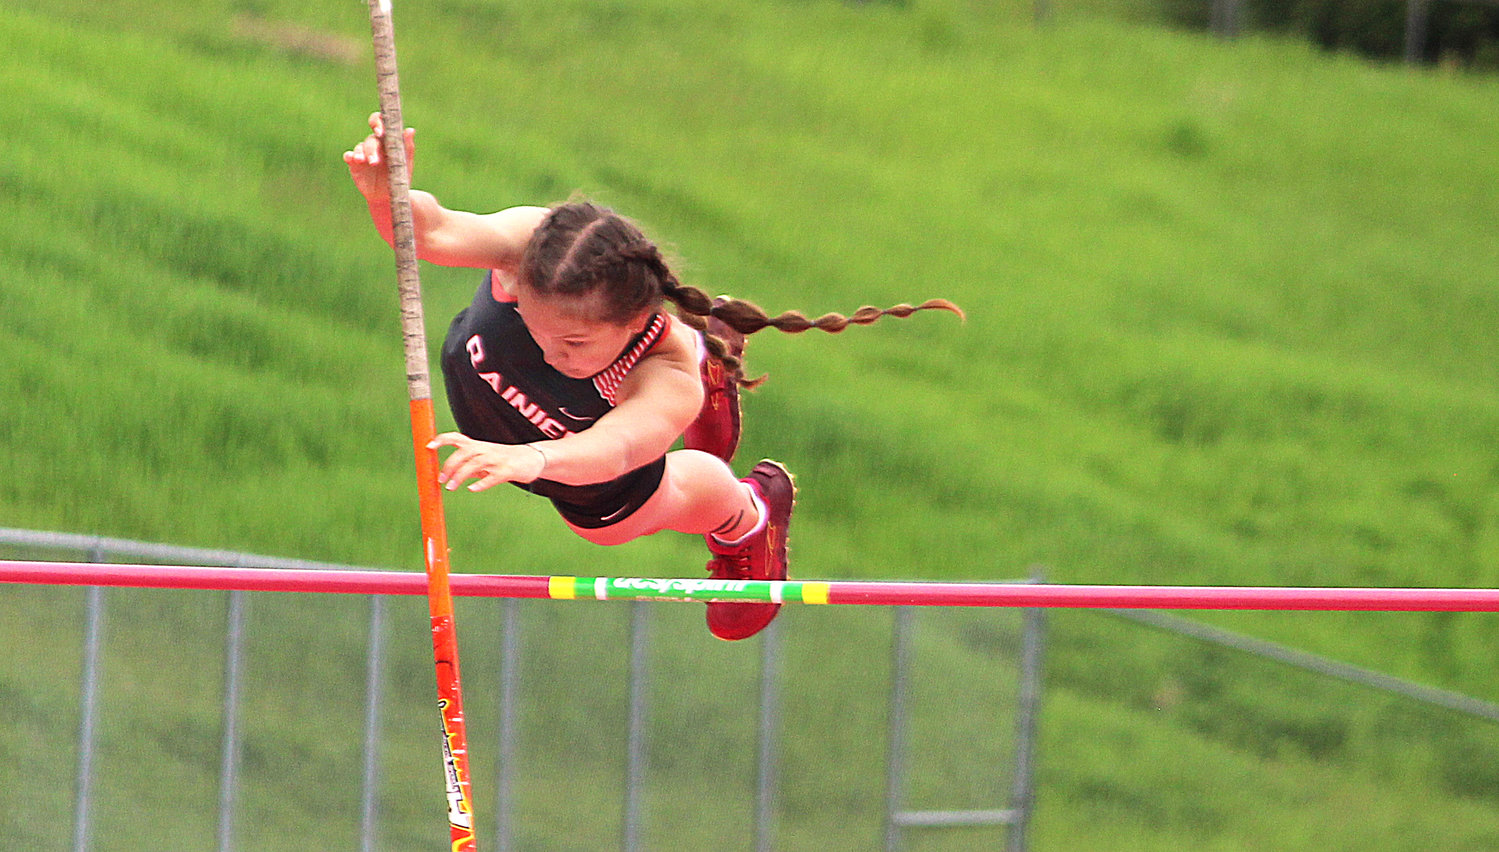 Rainier's Ella Marvin clears the pole vault bar during the State 1B/2B/1A Track and Field Championships in Cheney on Friday, May 27, 2022.